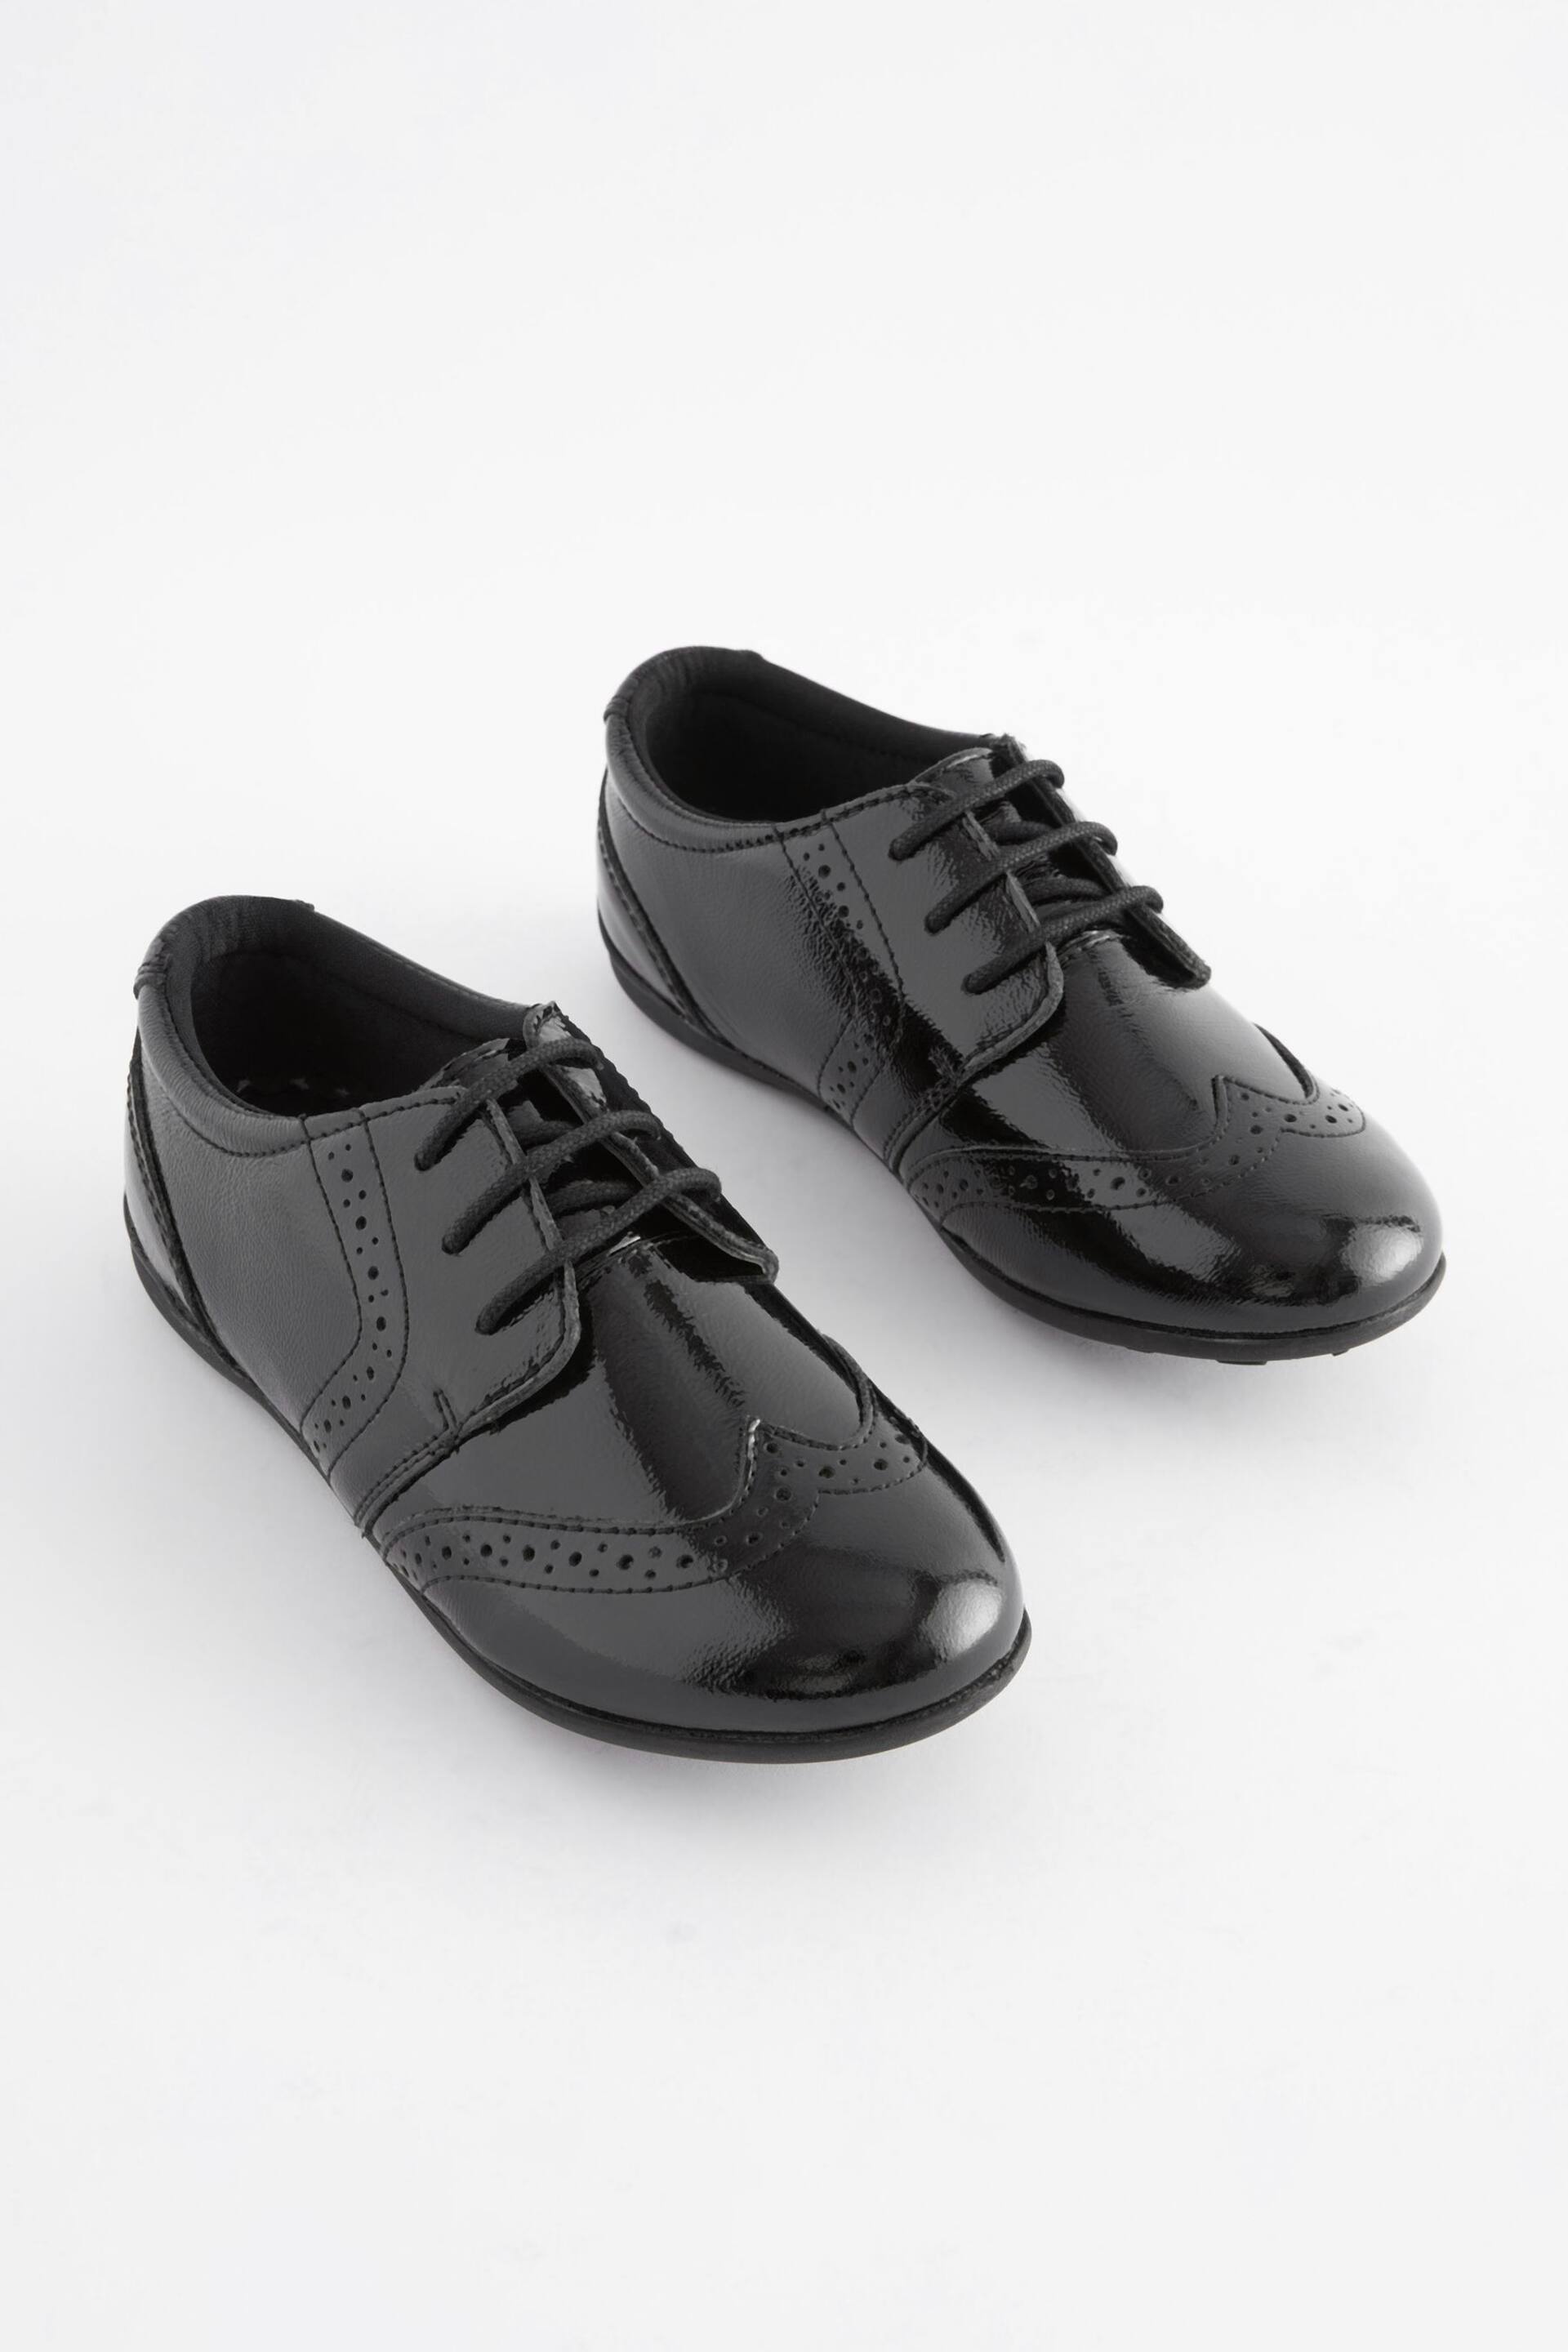 Black Patent Standard Fit (F) School Leather Lace-Up Brogues - Image 1 of 9